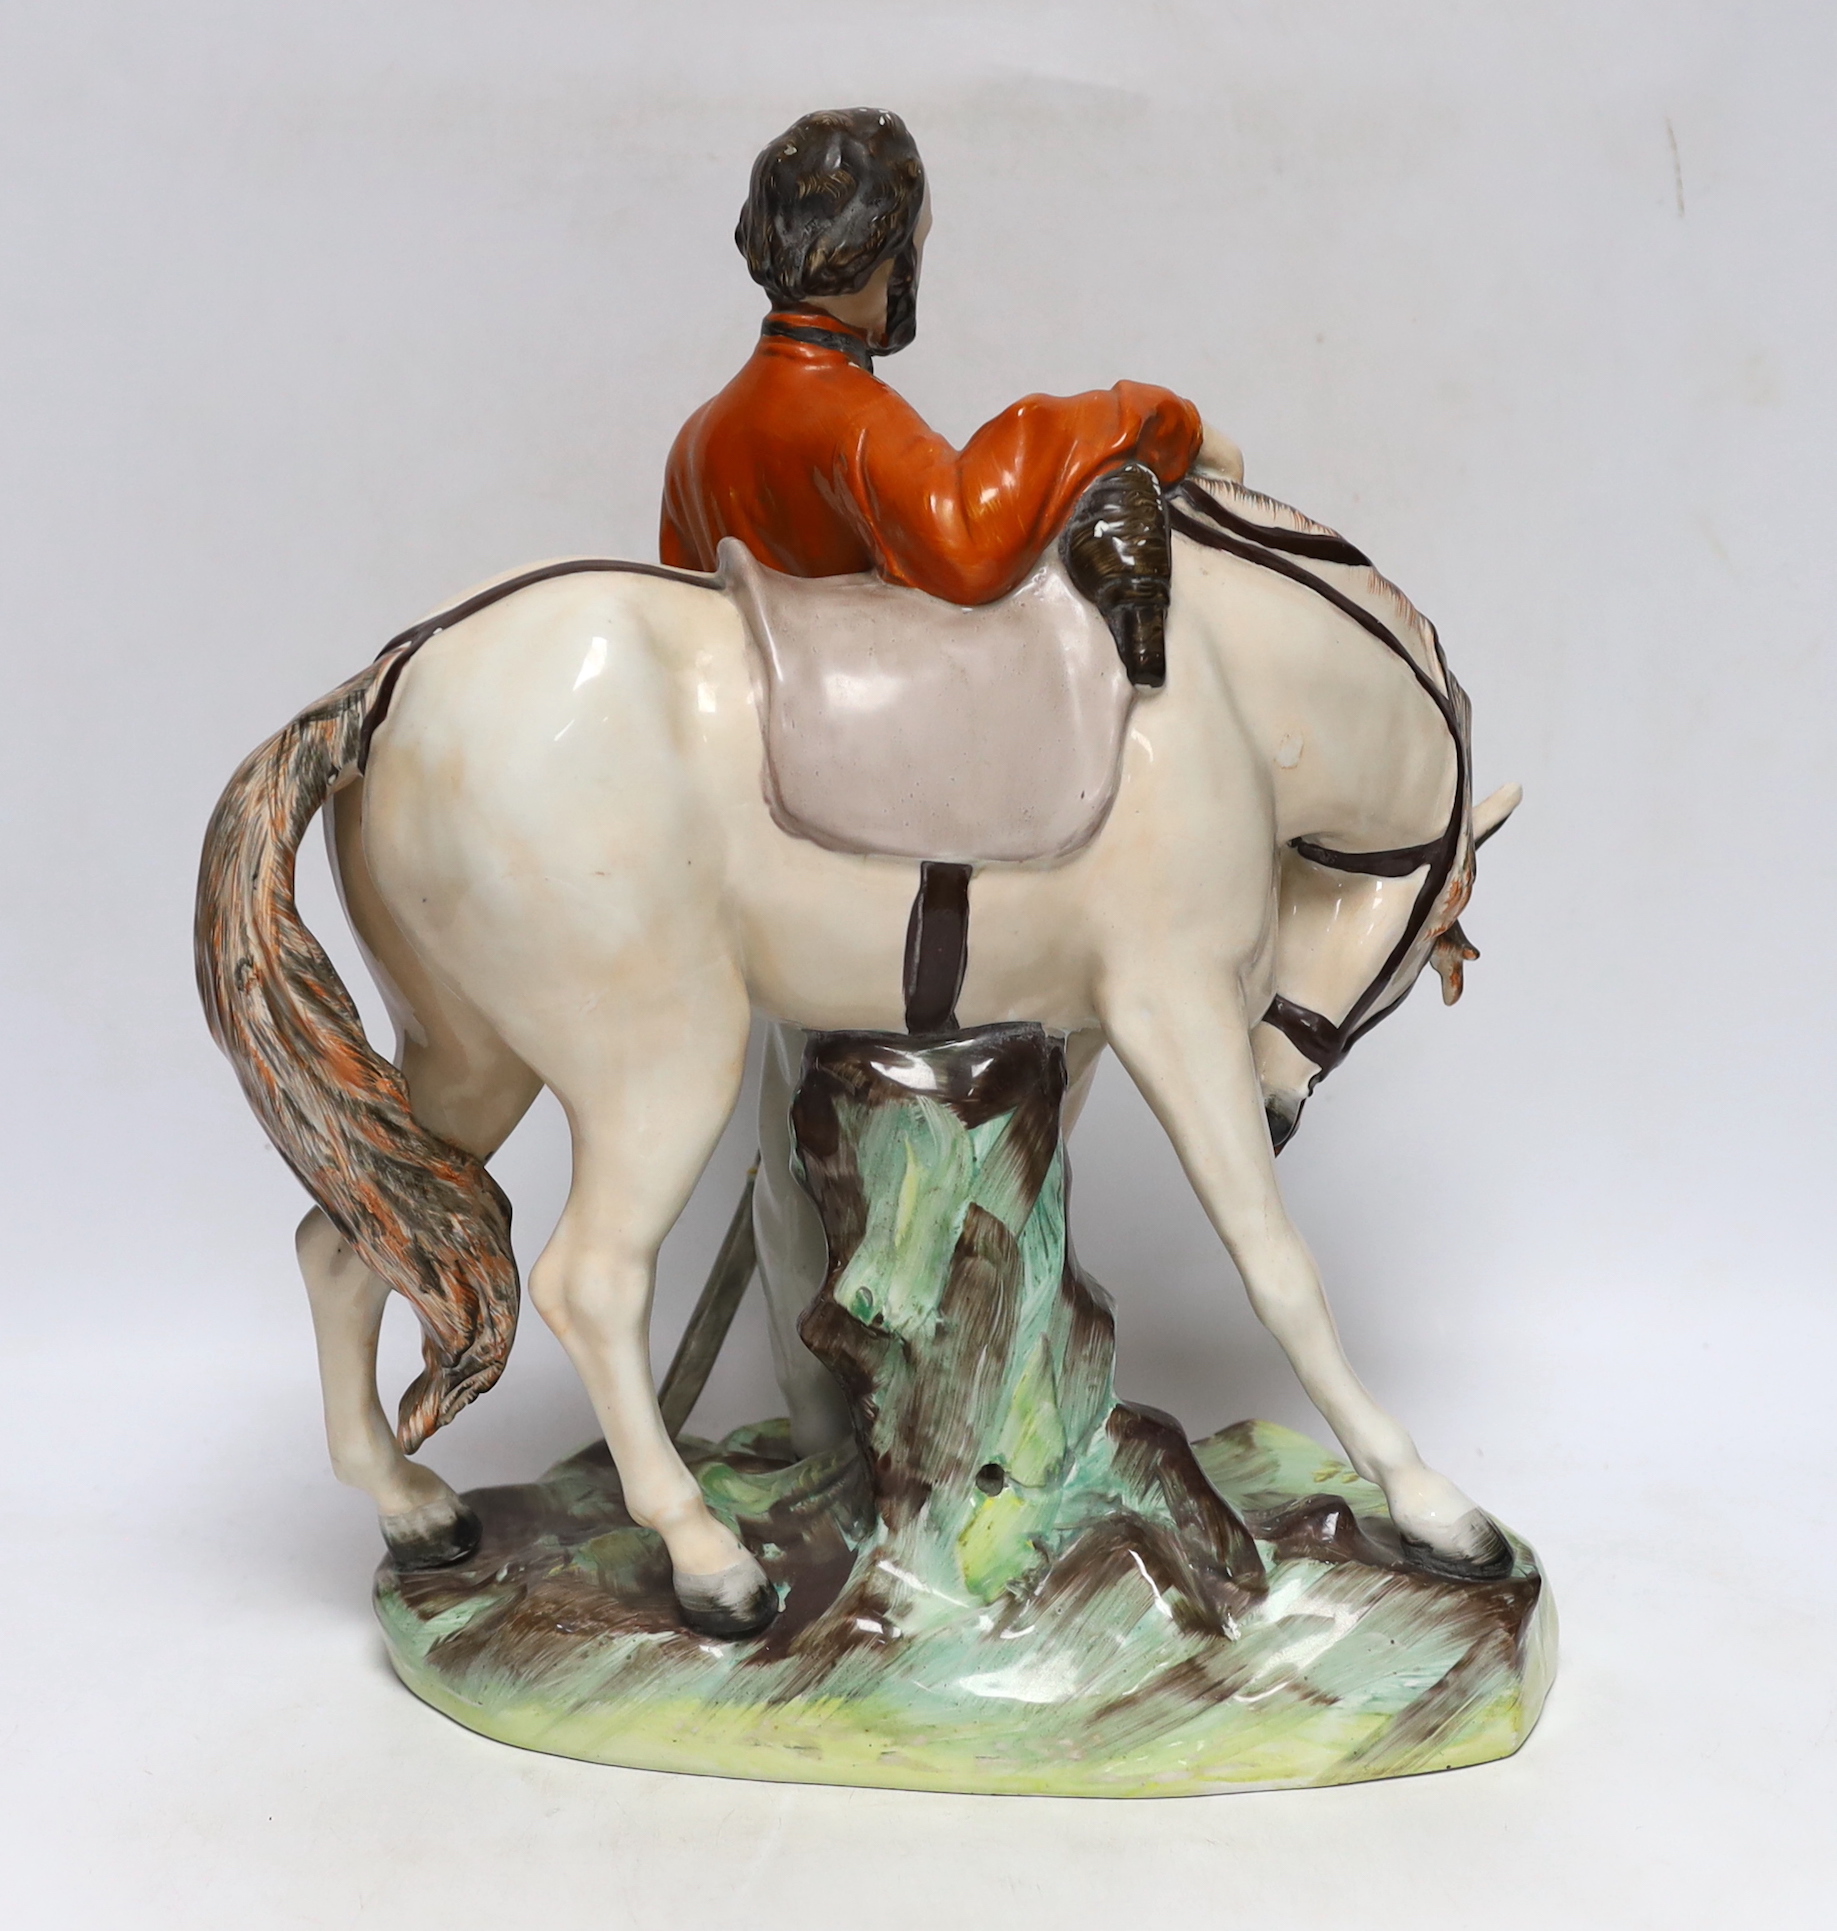 A mid 19th century Staffordshire group of Garibaldi by Thomas Parr, 37cm high